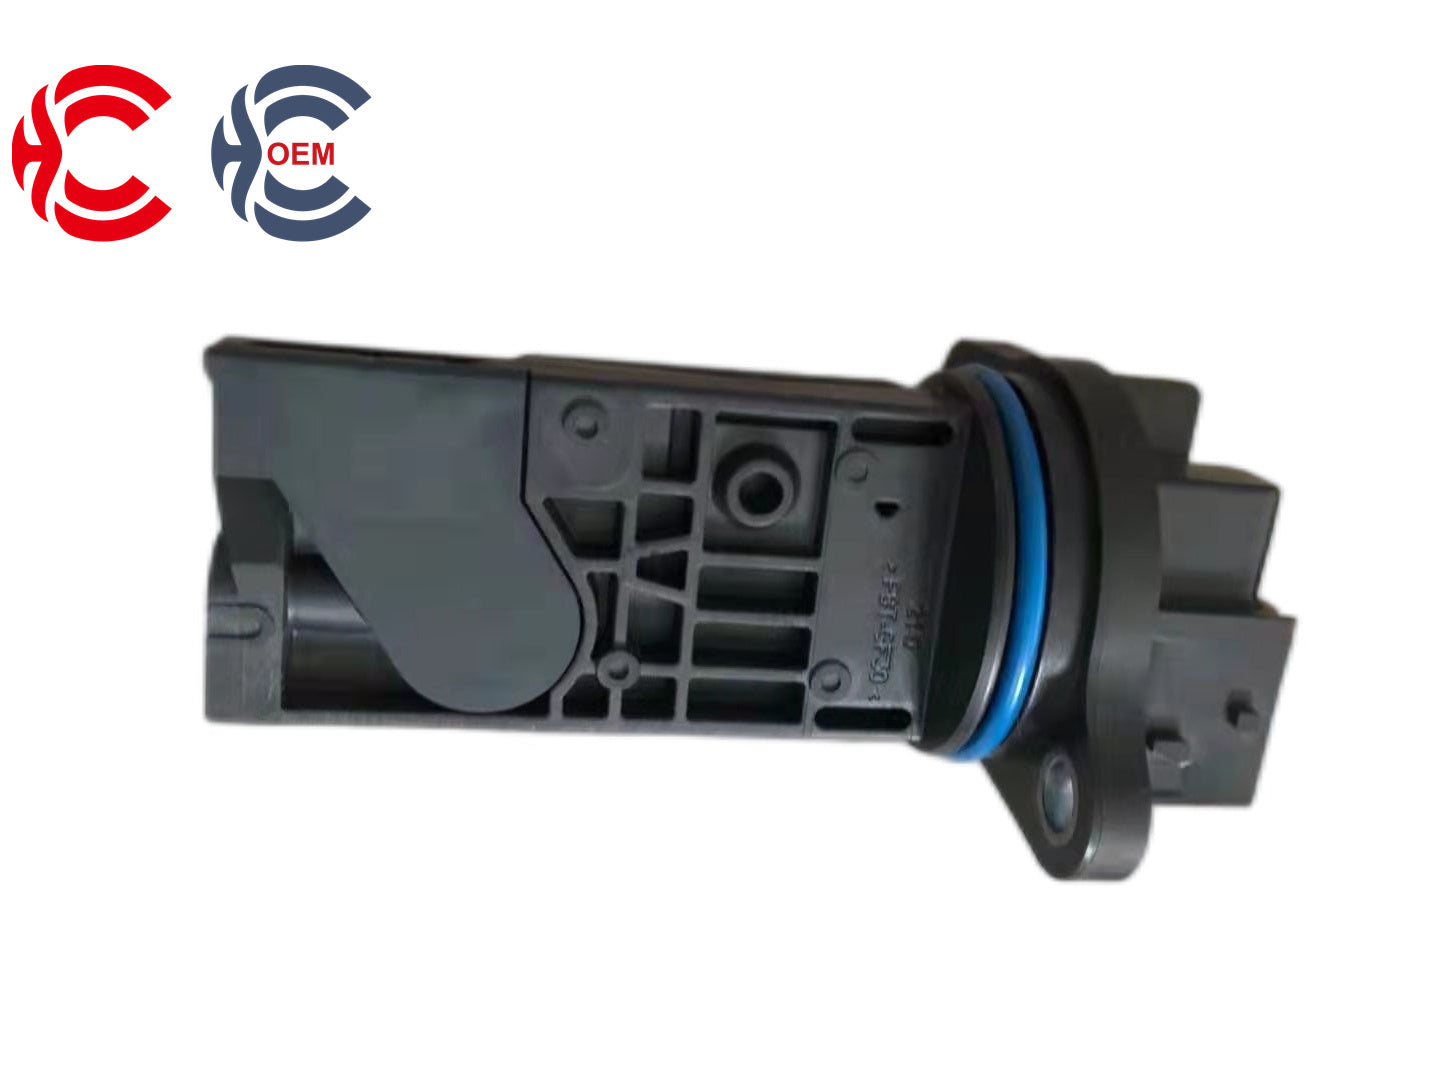 OEM: 028021801D PFMMaterial: ABSColor: BlackOrigin: Made in ChinaWeight: 200gPacking List: 1* Air Flow Sensor Sensor More ServiceWe can provide OEM Manufacturing serviceWe can Be your one-step solution for Auto PartsWe can provide technical scheme for you Feel Free to Contact Us, We will get back to you as soon as possible.